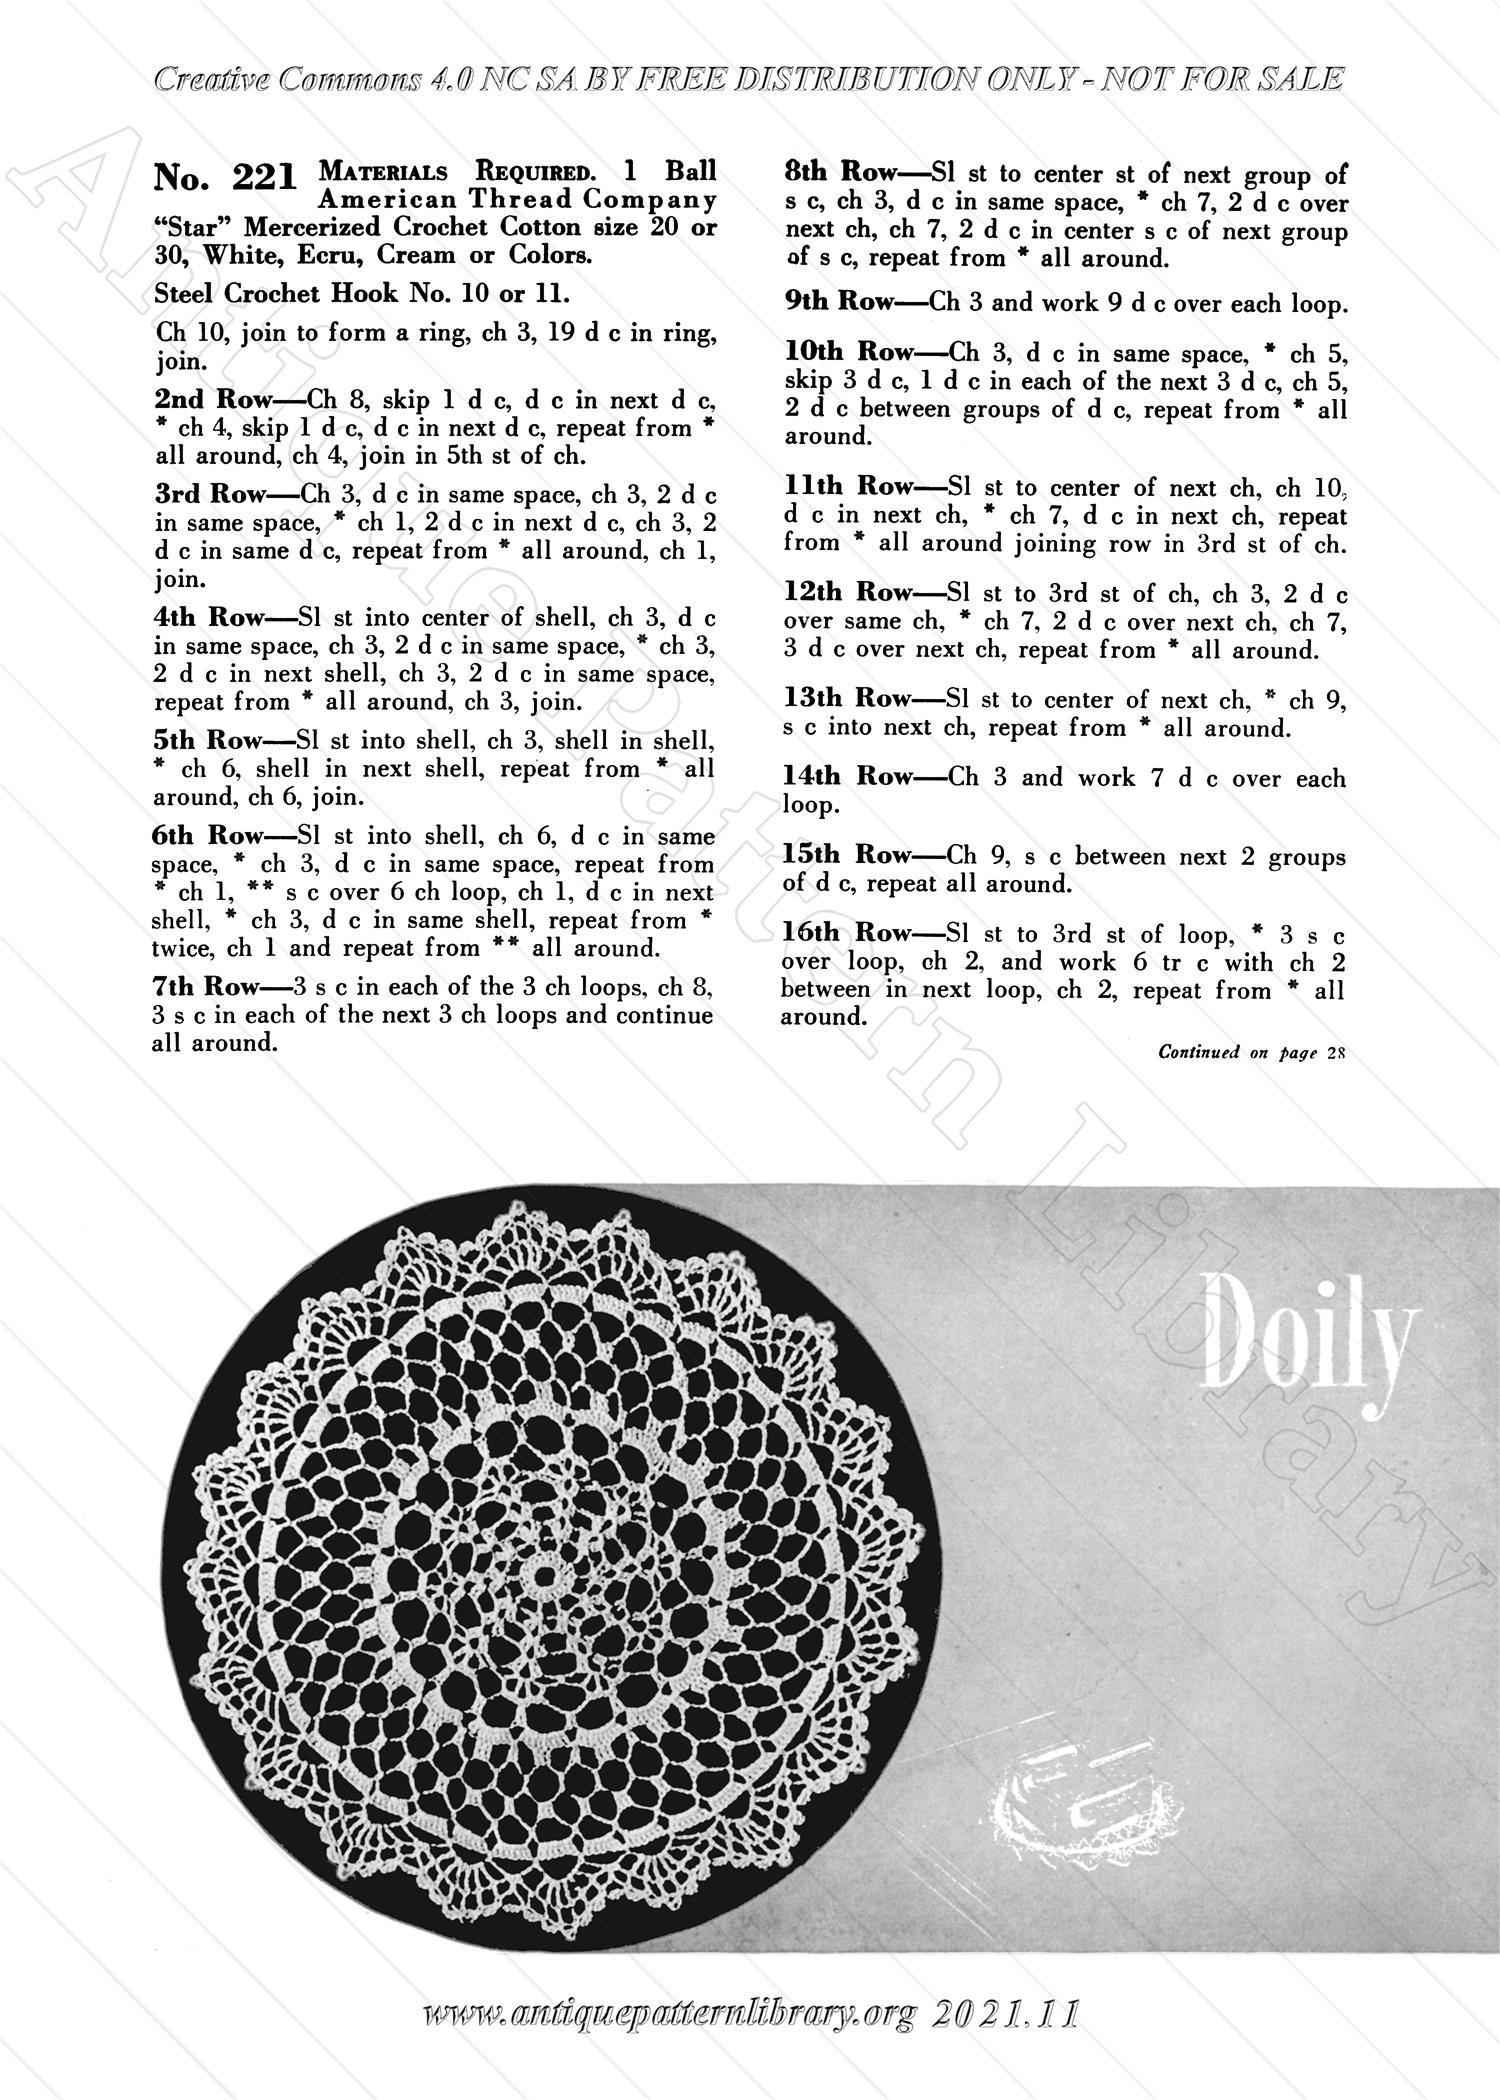 L-OS005 The Variety Book of Crochet